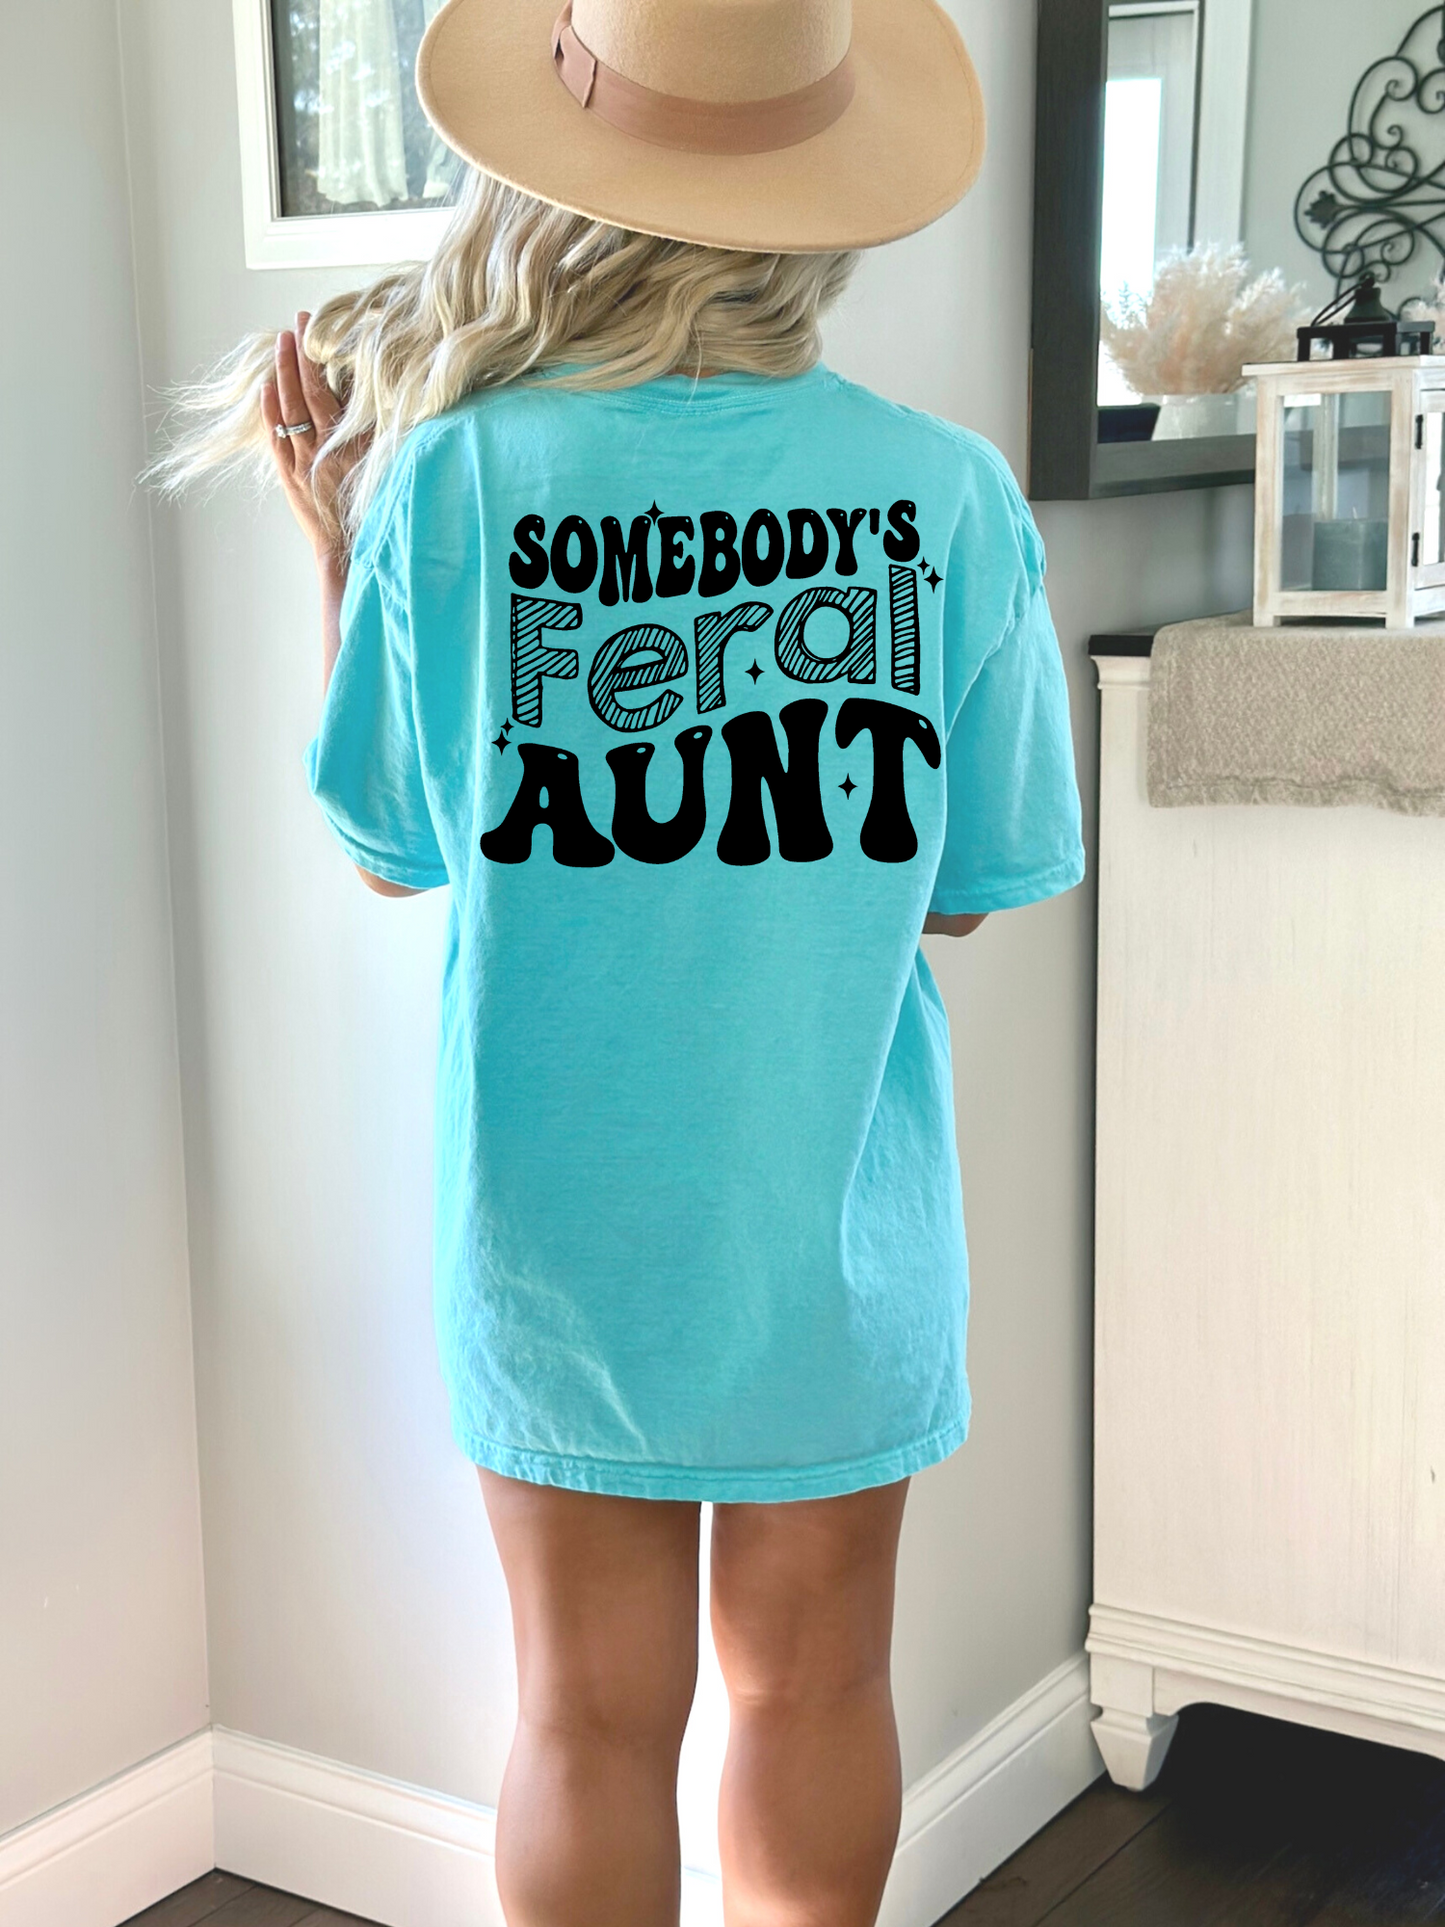 Somebody's feral aunt tee